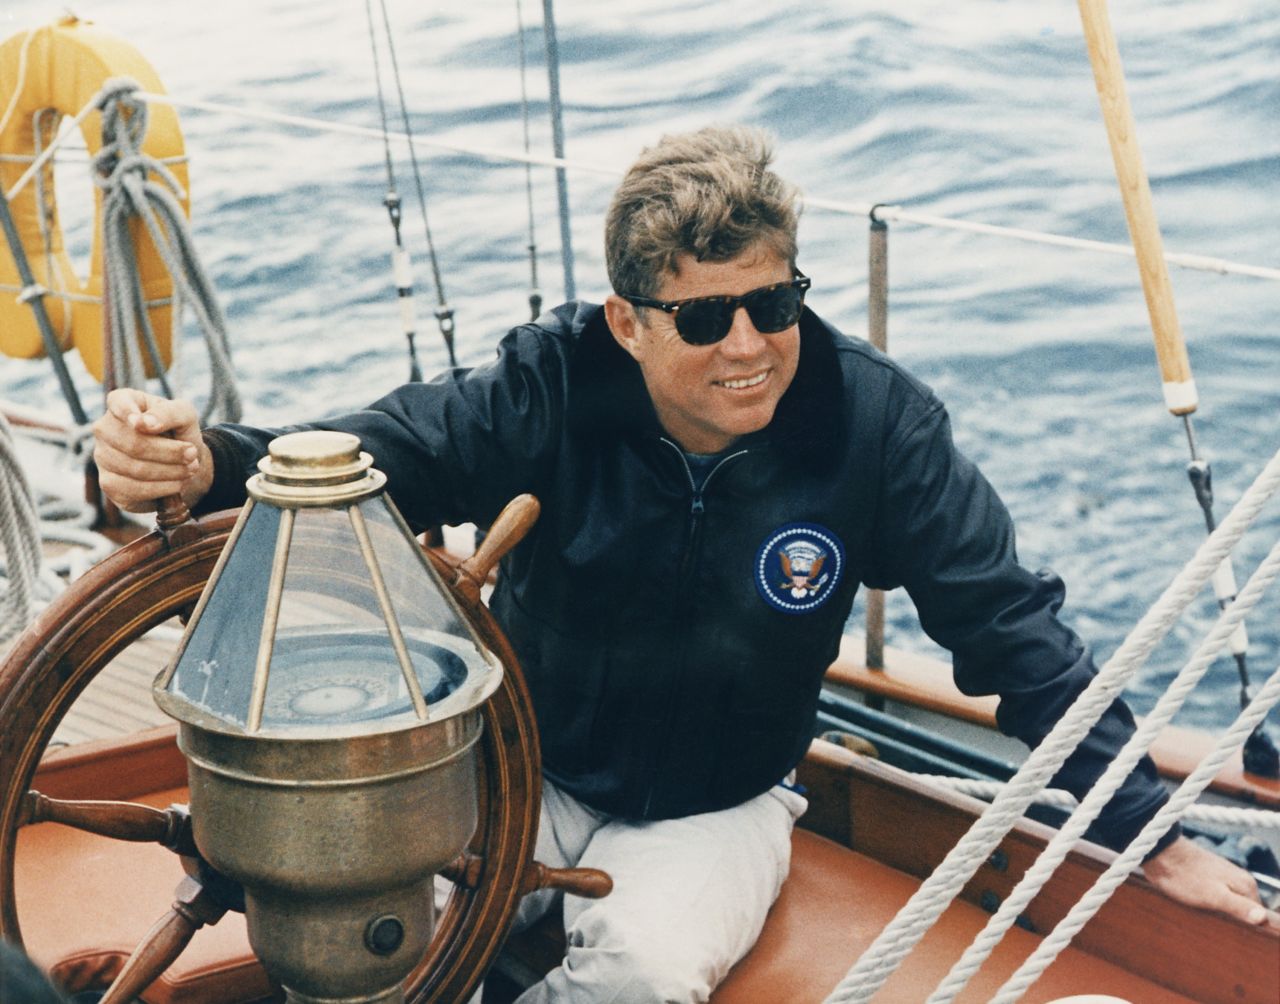 Like many members of the Kennedy family, John F. Kennedy loved sailing and was frequently photographed at sea with his wife, young children and other relatives.